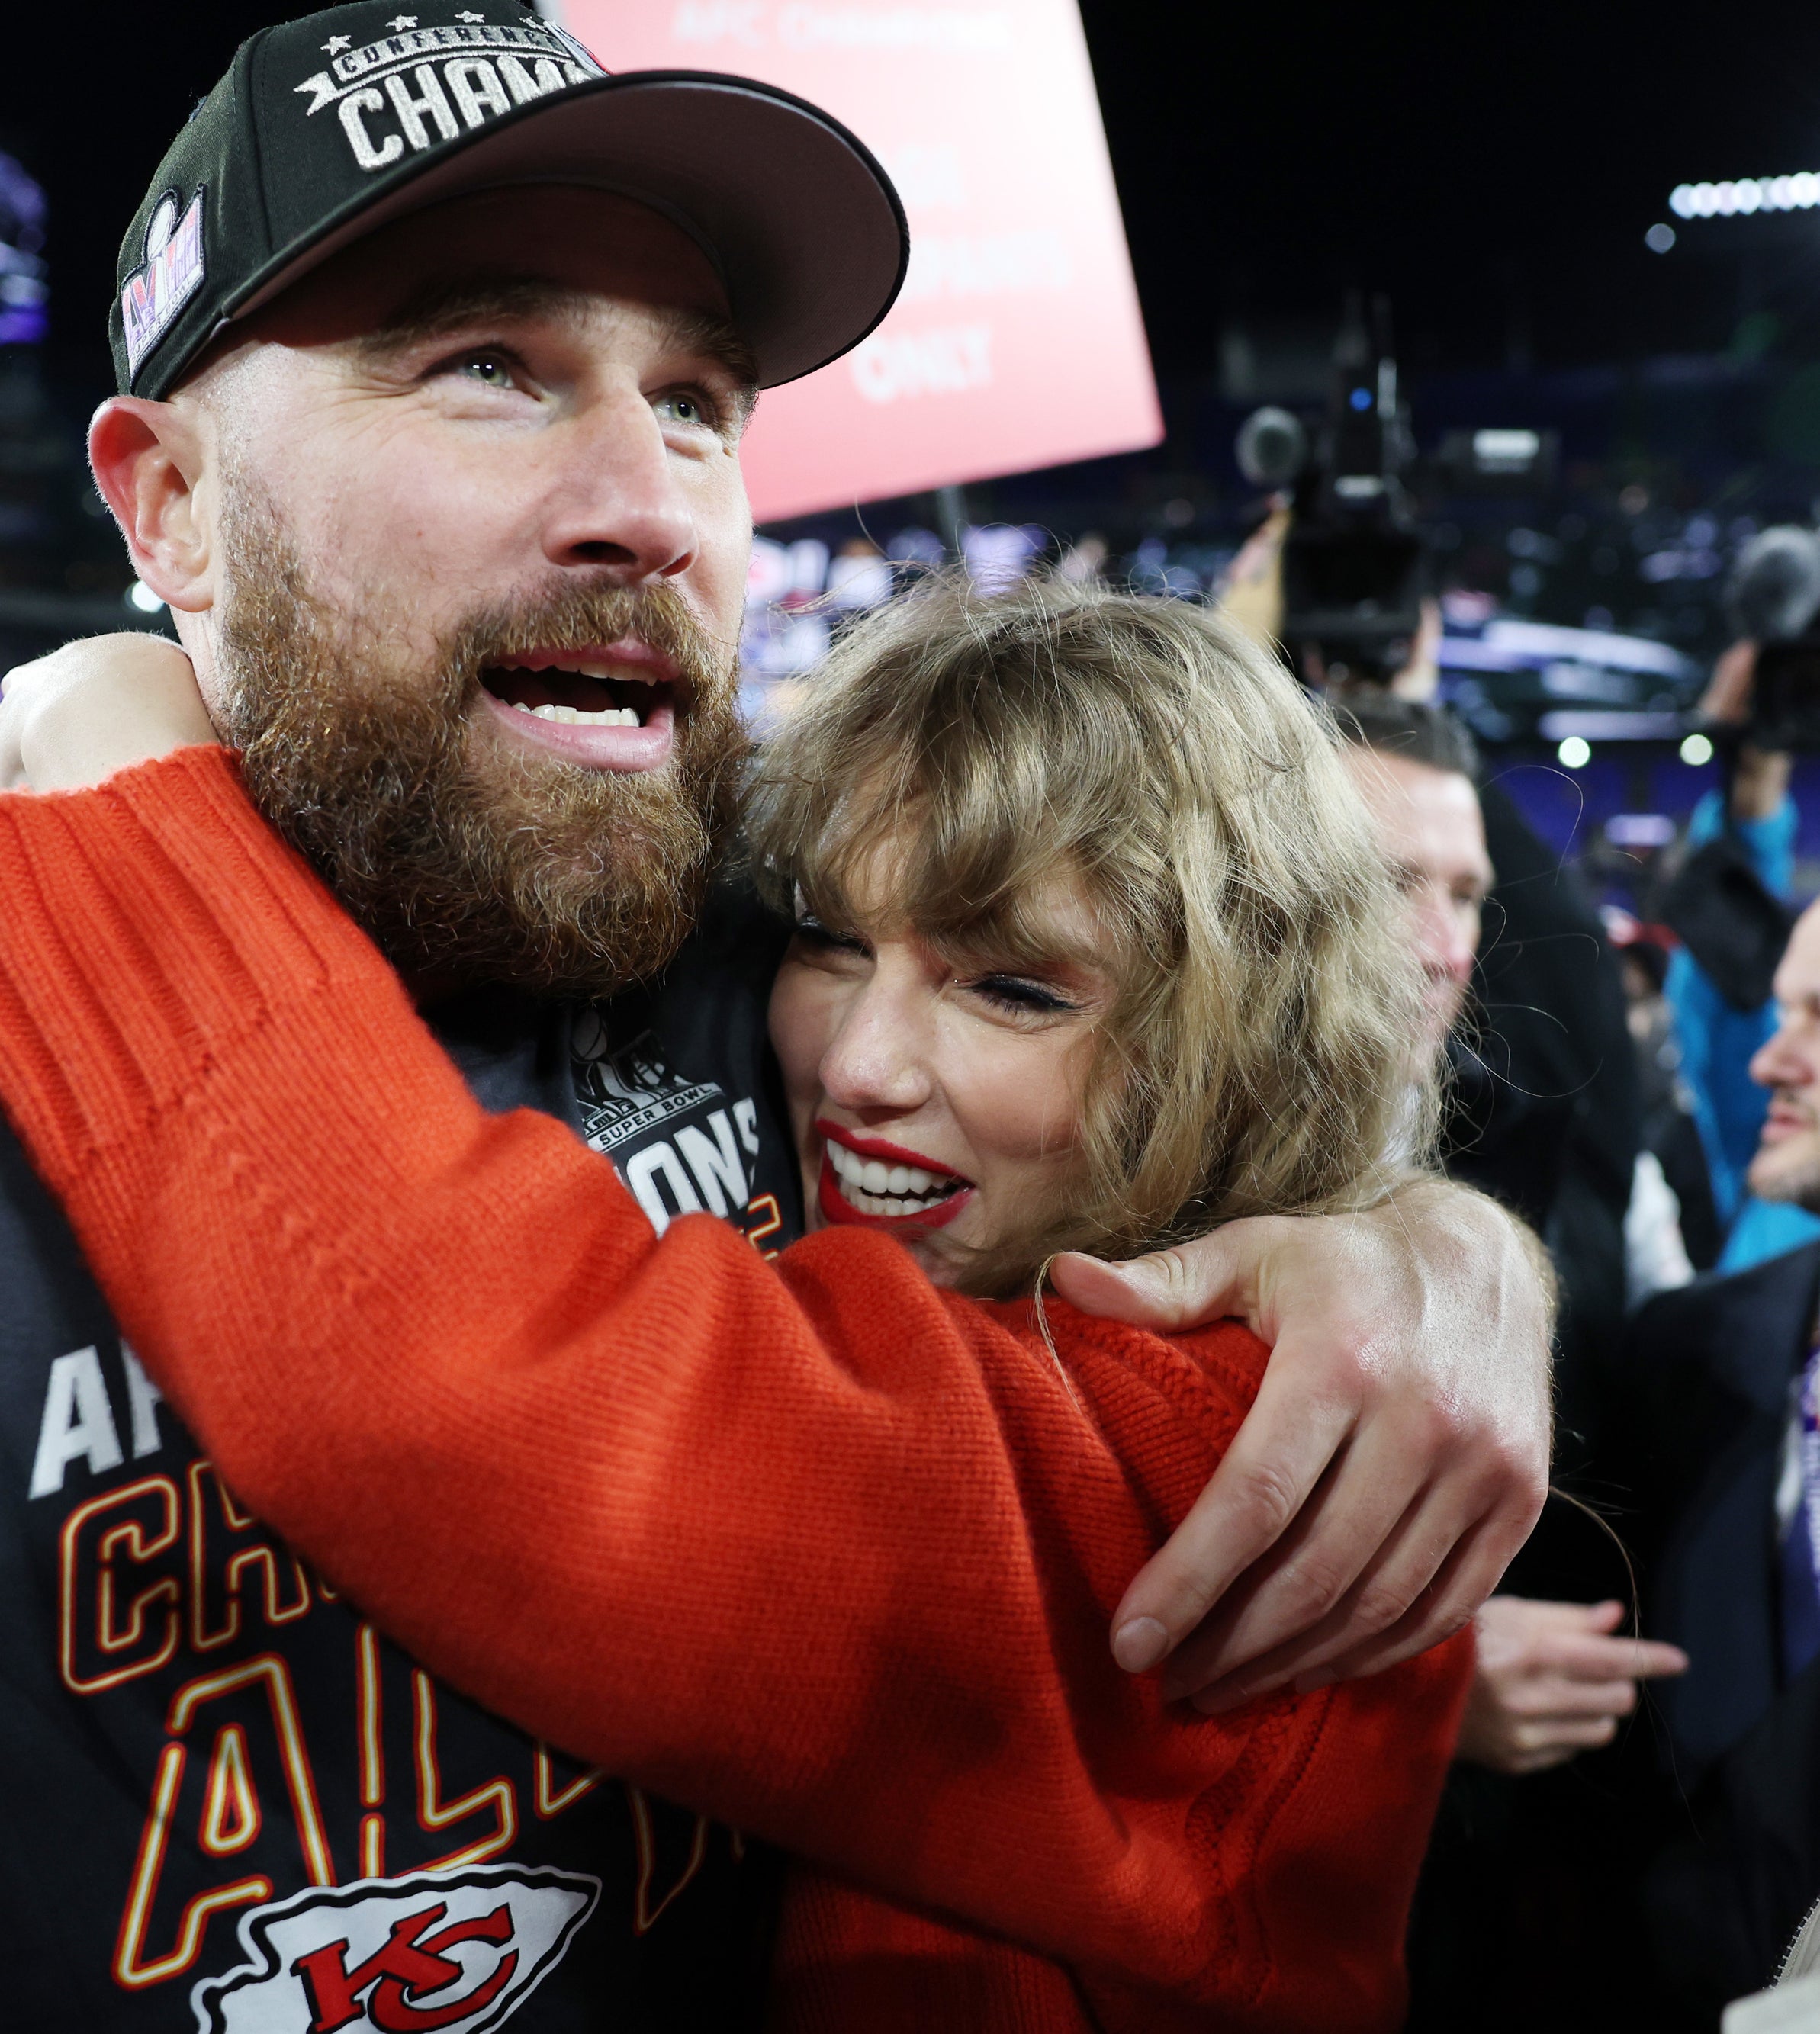 Travis Kelce in a baseball cap hugs a smiling Taylor Swift at an event, surrounded by cameras and onlookers